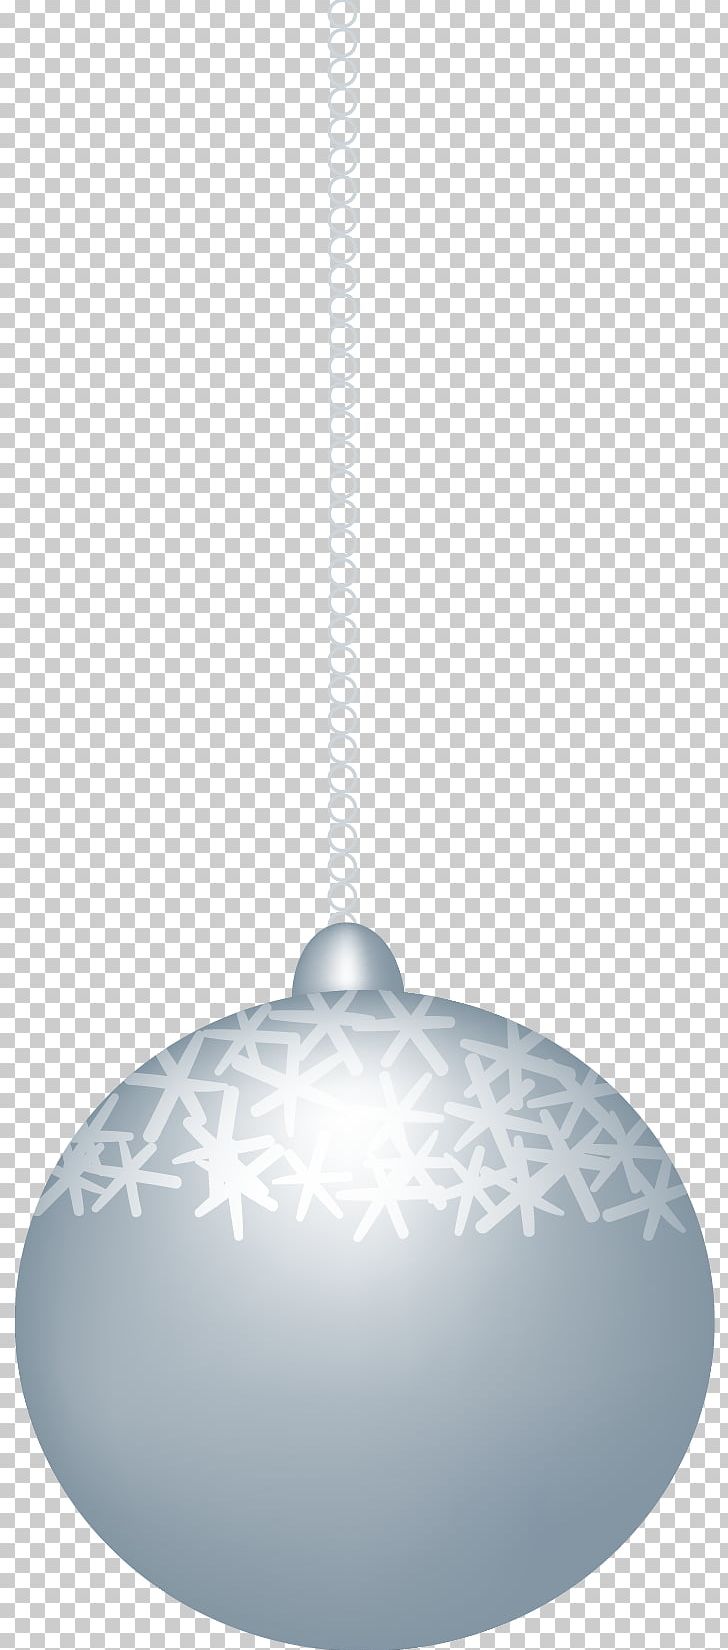 Light Fixture White Black PNG, Clipart, Ball, Black, Black And White, Breath, Christmas Ball Free PNG Download